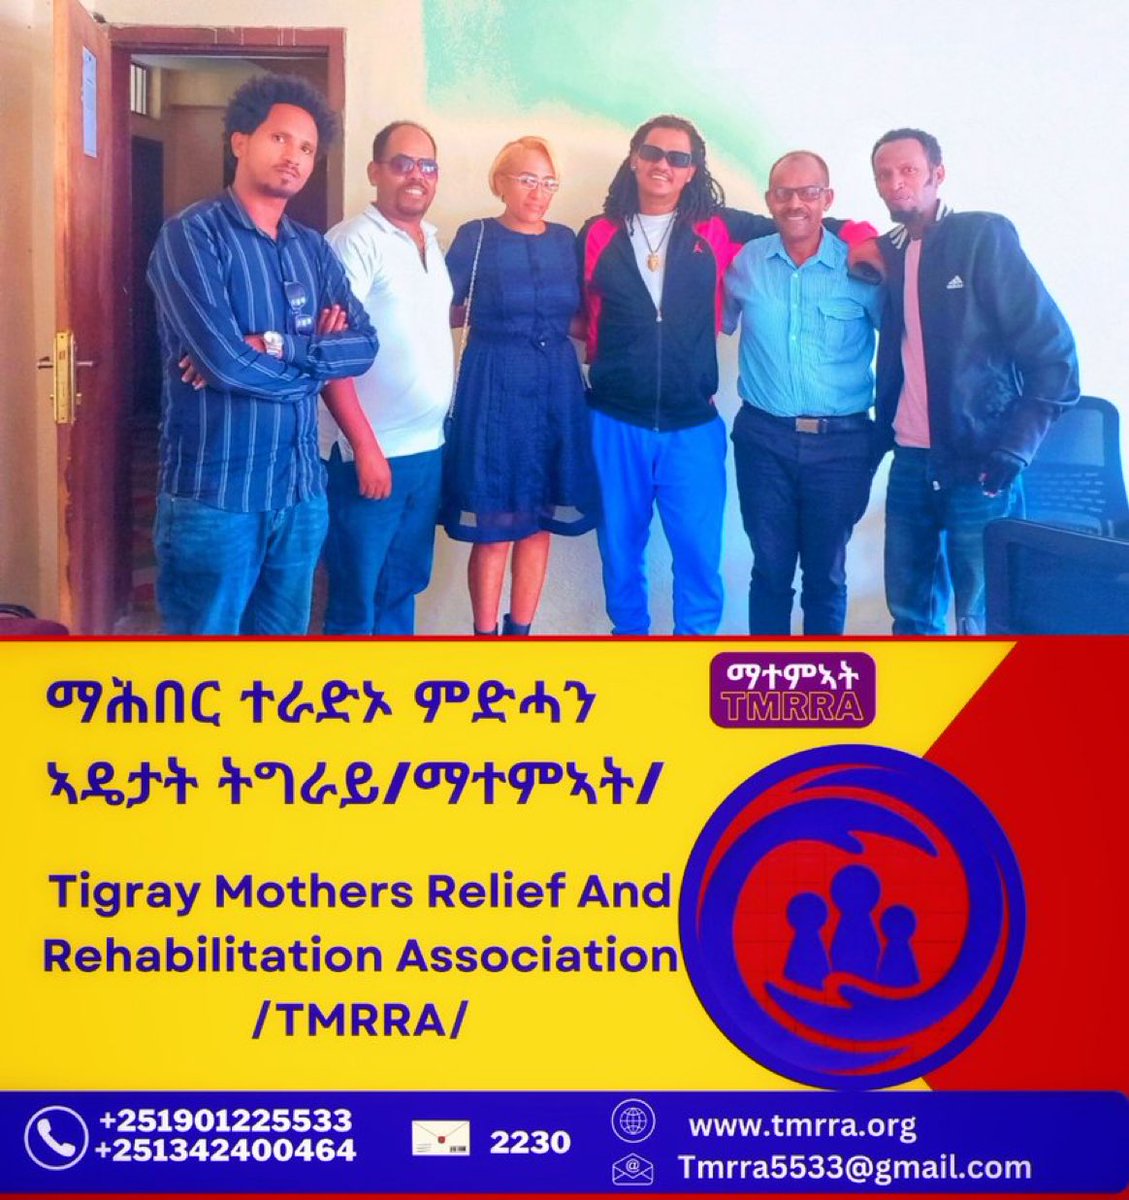 @tmrra5533's executive committee has held a fruitful discussion regarding the upcoming 1st year
anniversary and fundraising, which is going to be celebrated on May 19th, 2024.🙏✊
#Justice4TigraysWomenAndGirls
@lrobta @Akebom29 @welduytbarek @berry__of